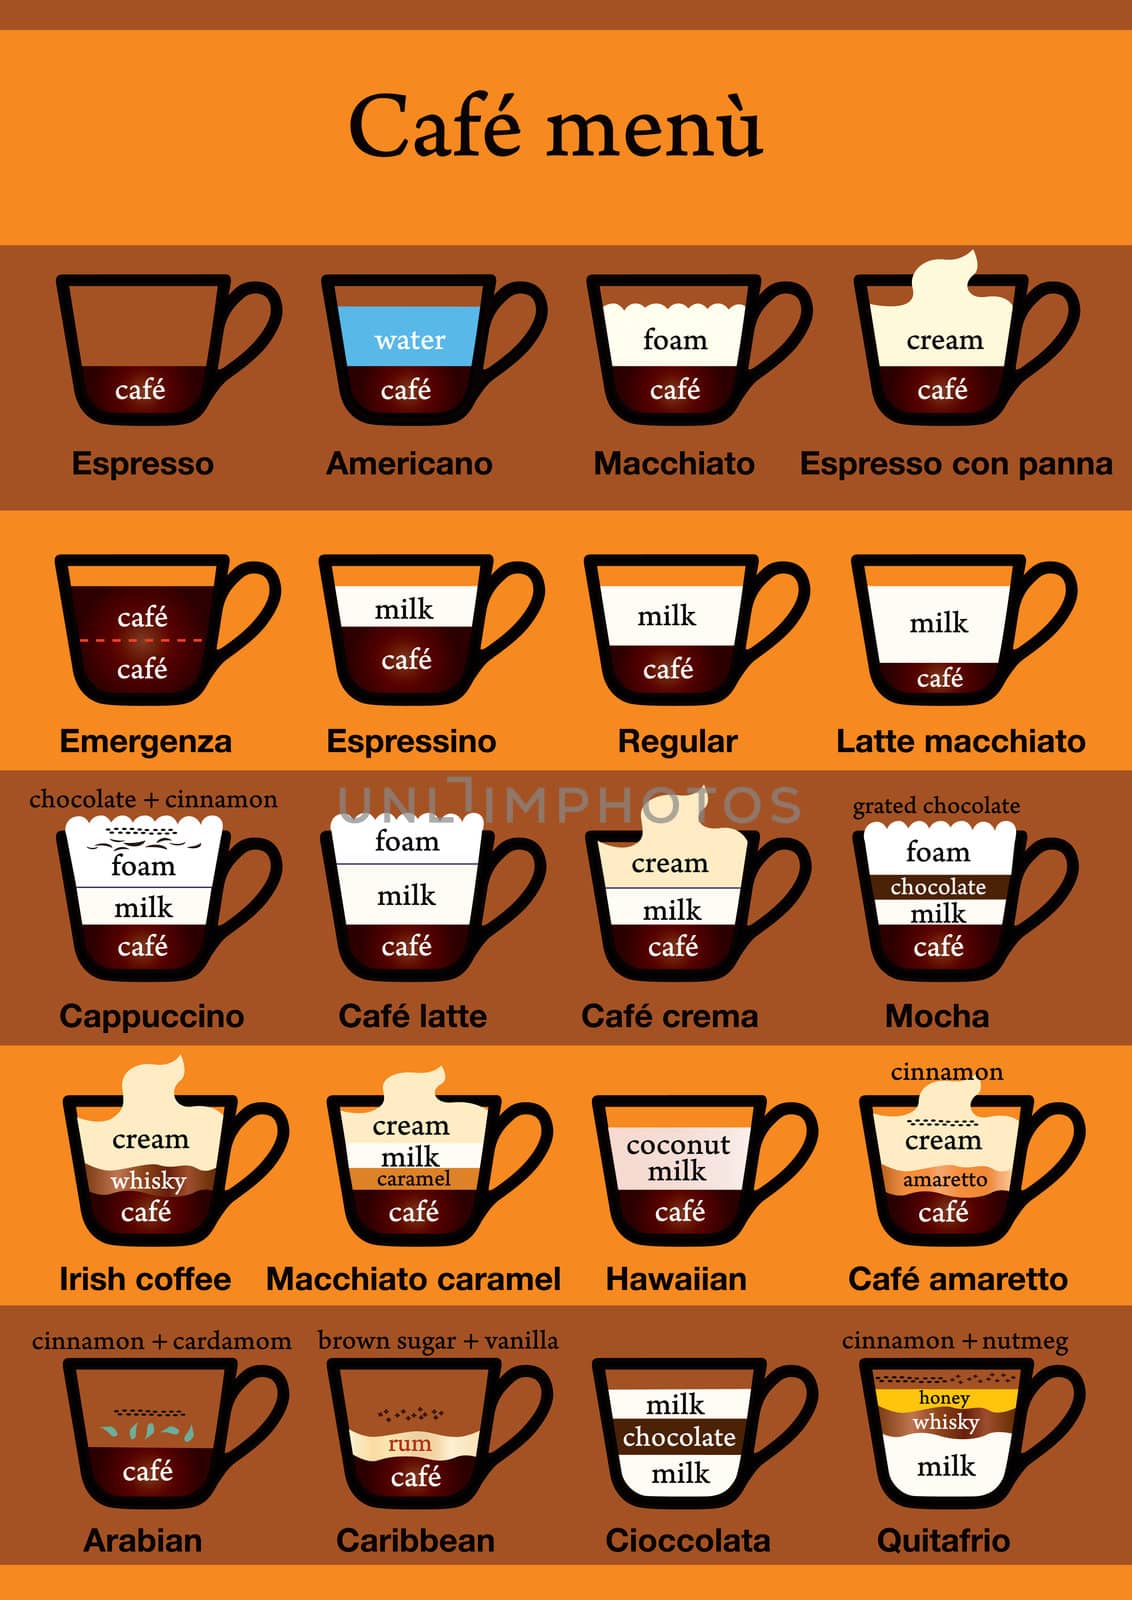 Twenty kind of coffee menu as a table. Ingredients visible. Text in english and italian names for italian kind of caffe.